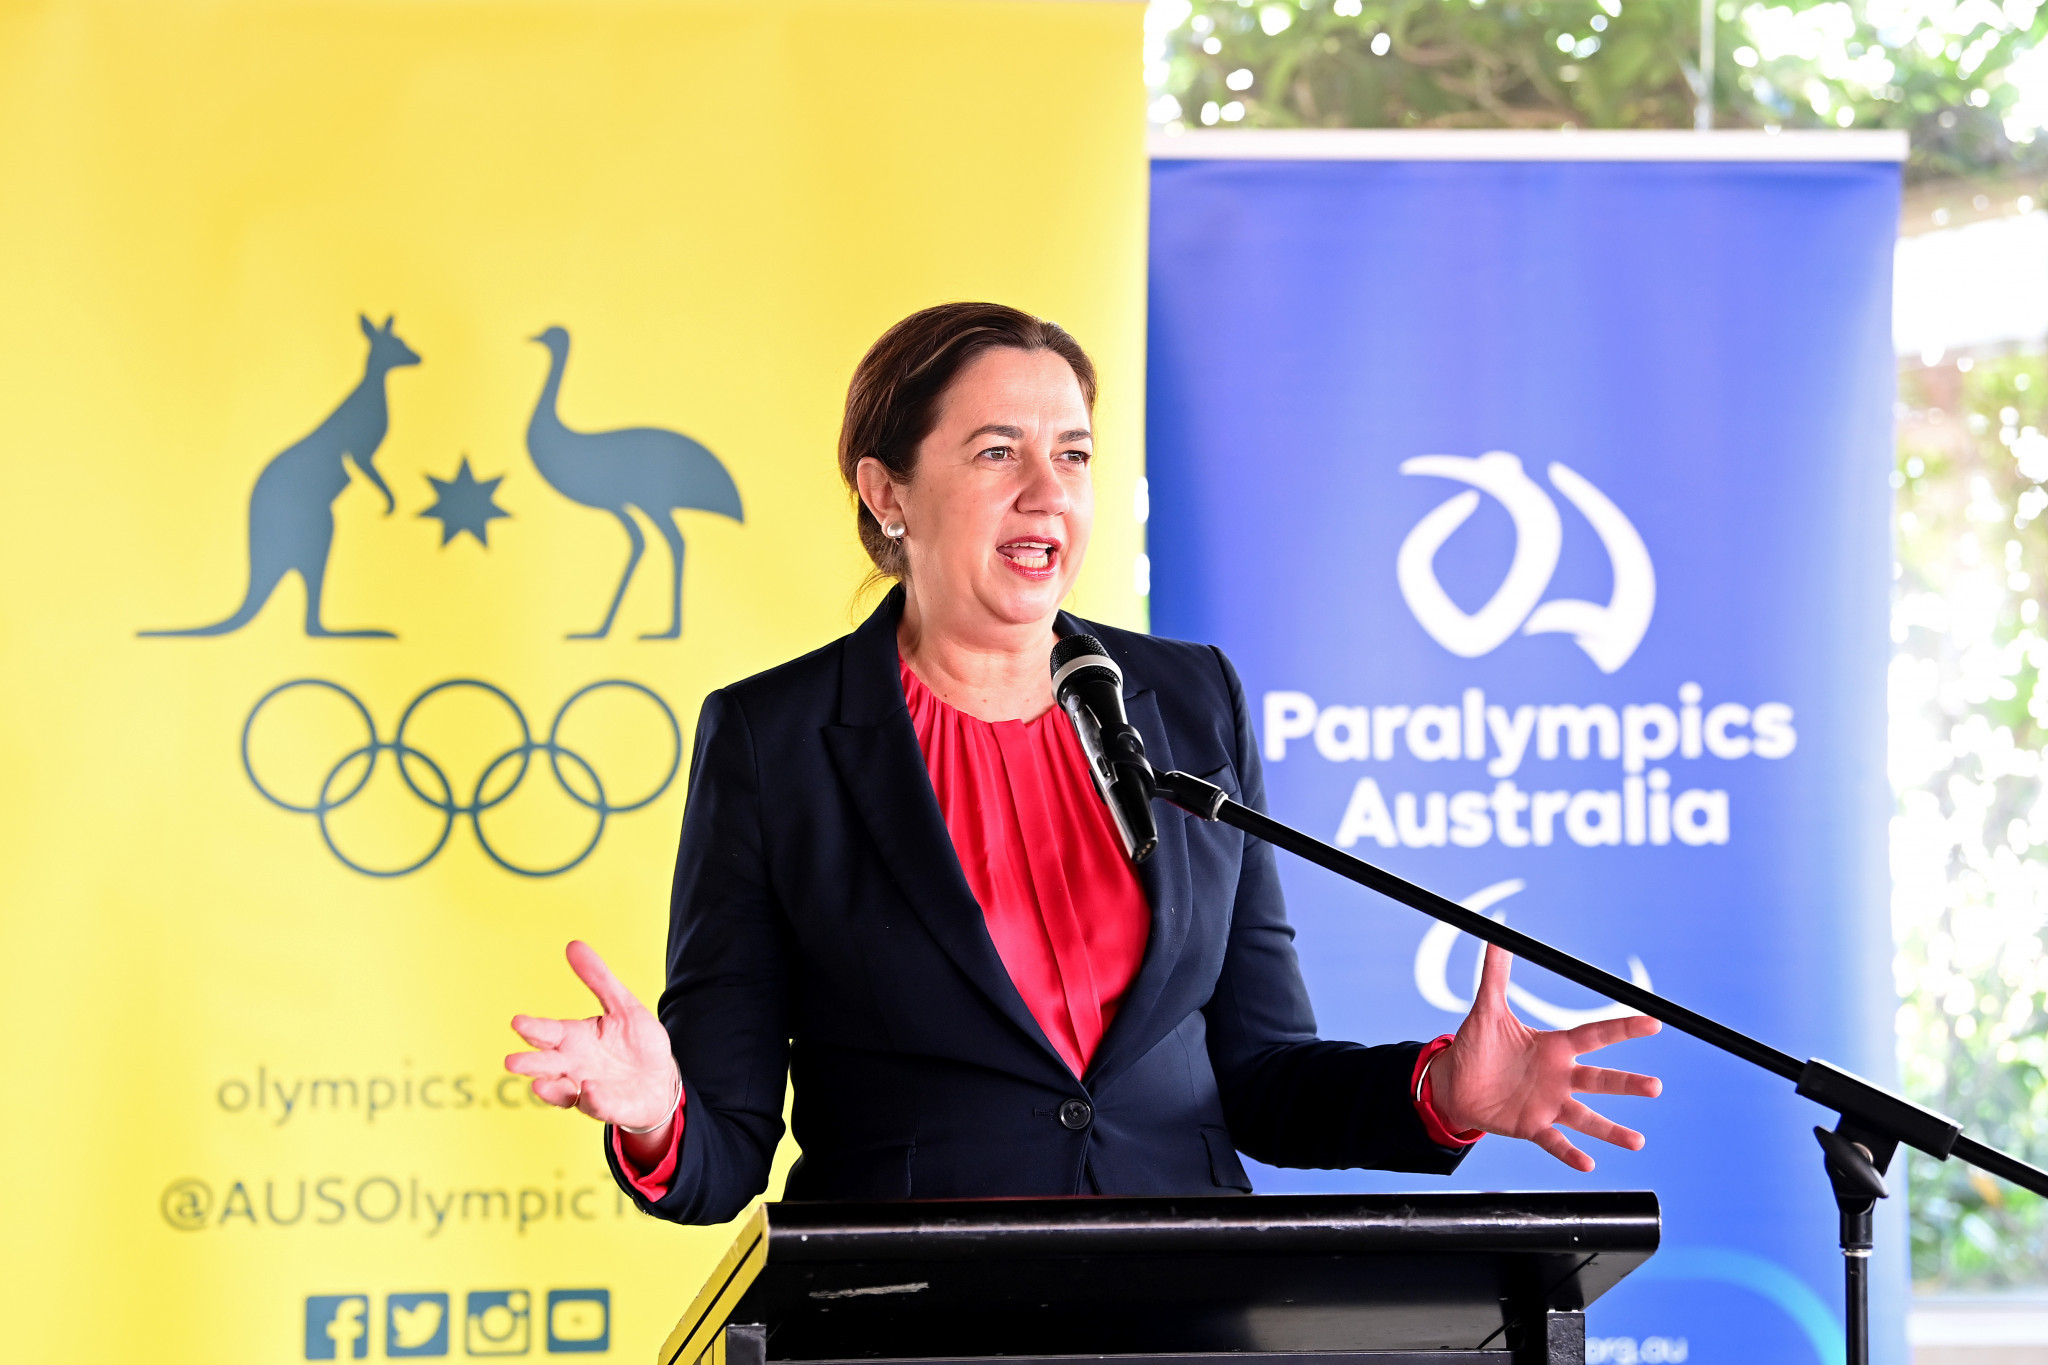 Queensland Premier Annastacia Palaszczuk says the Games will deliver a golden age for the state ©Getty Images